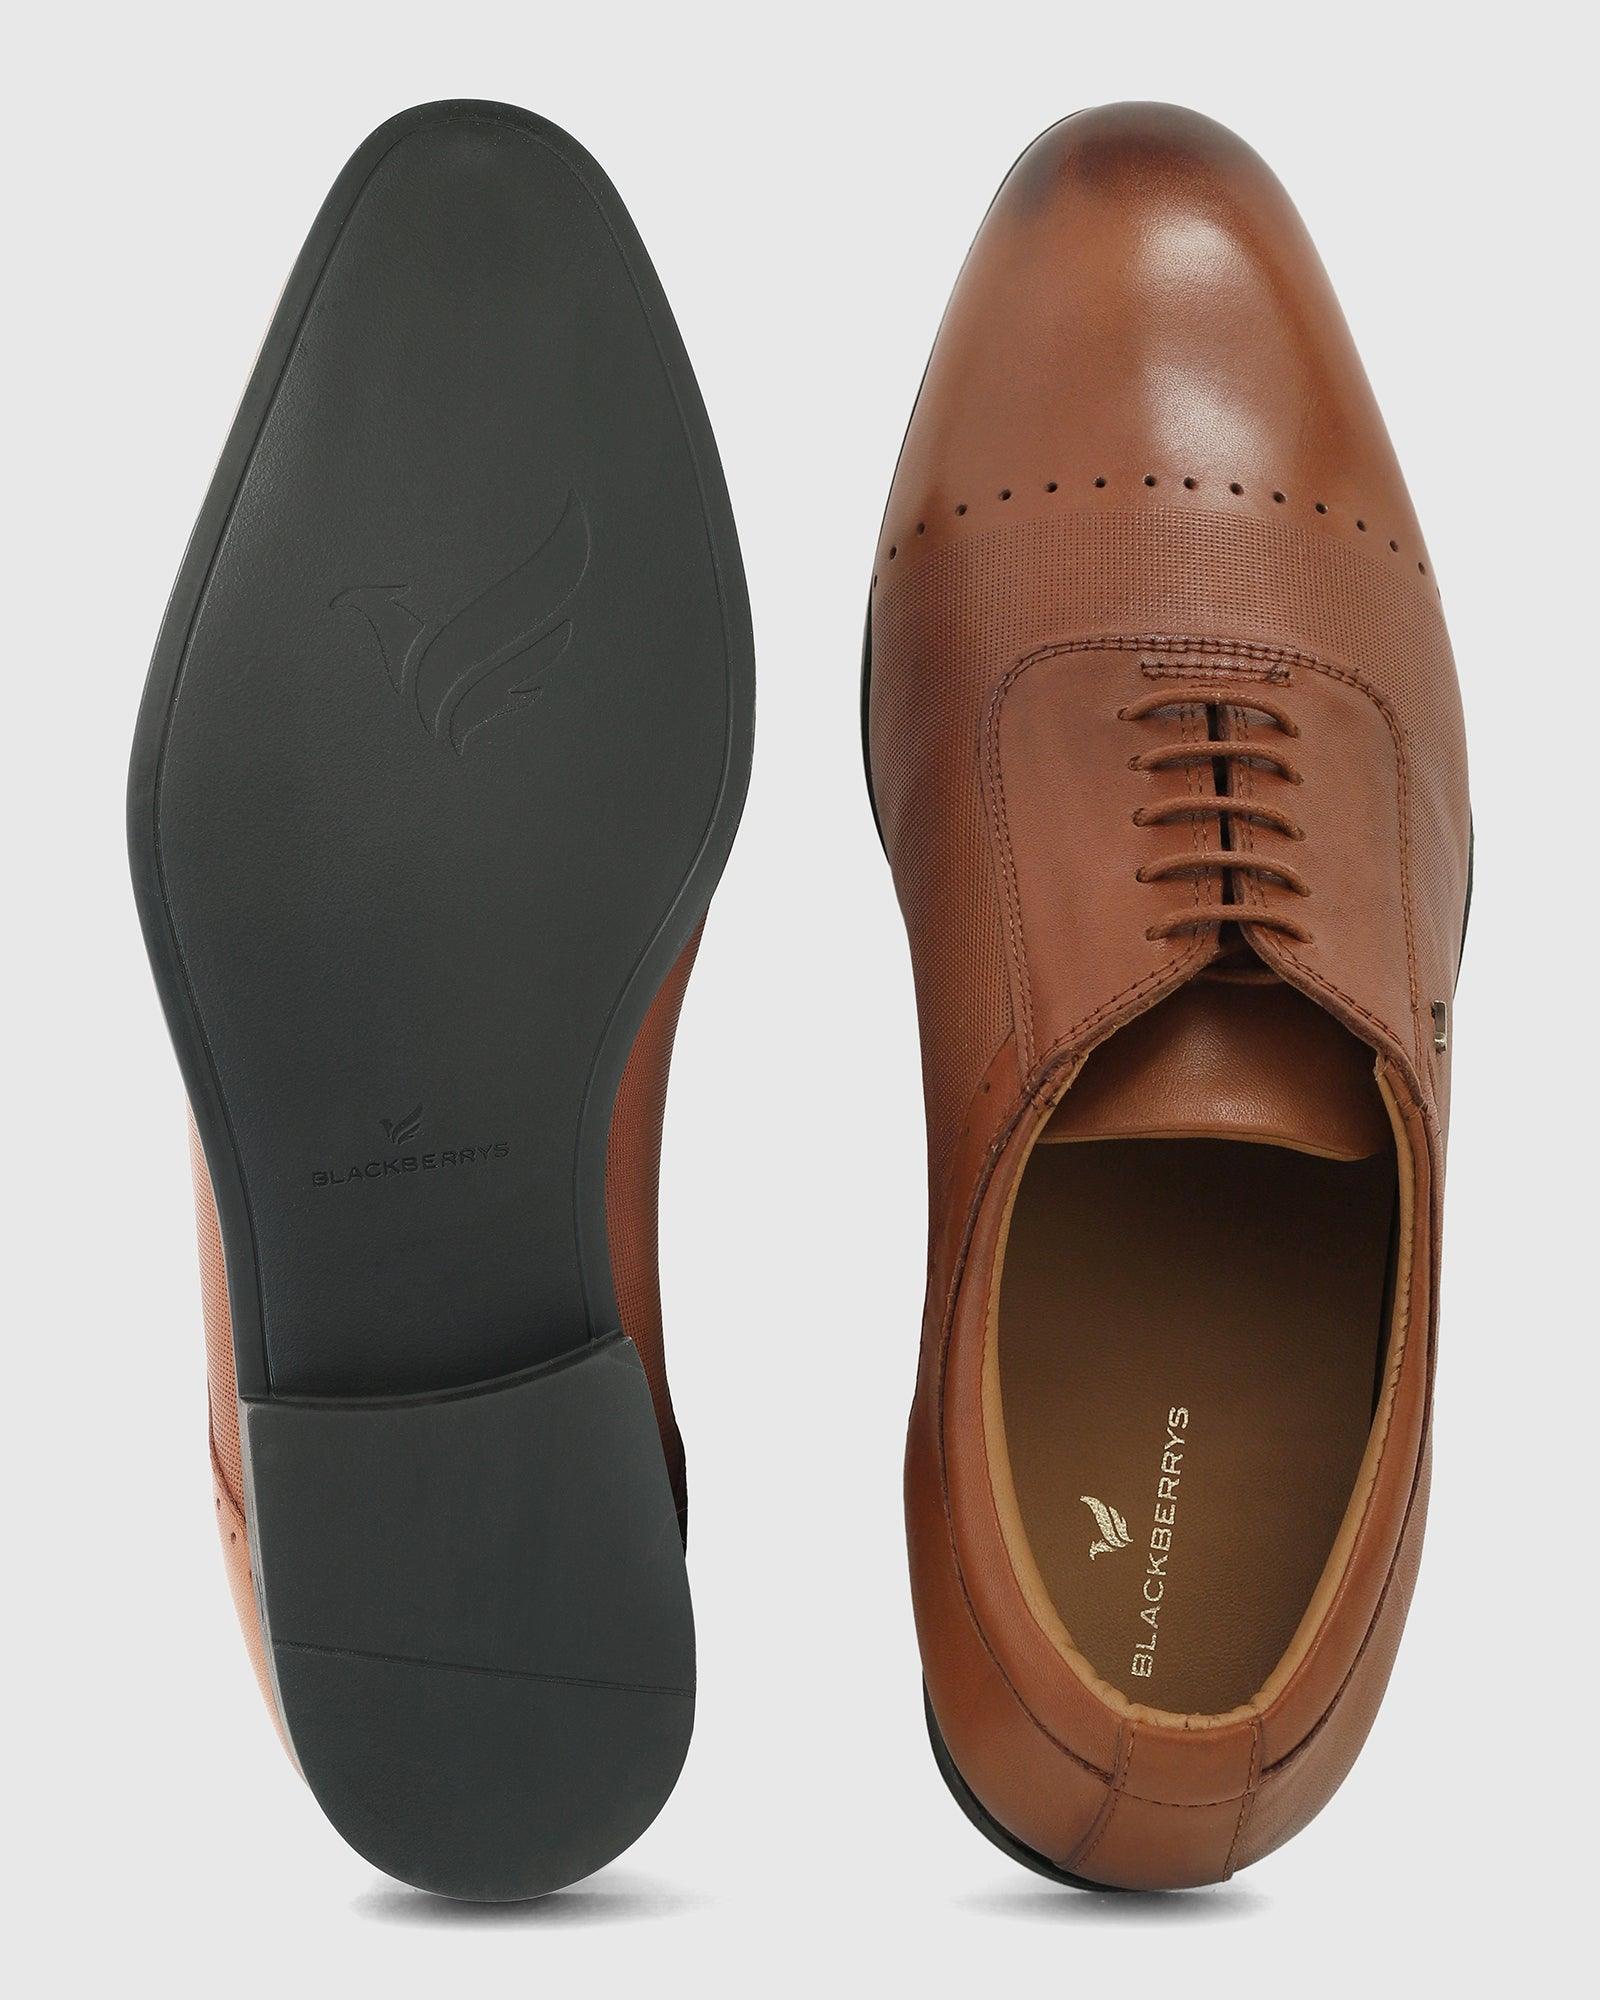 Must Haves Leather Tan Textured Oxford Shoes - Kiwi